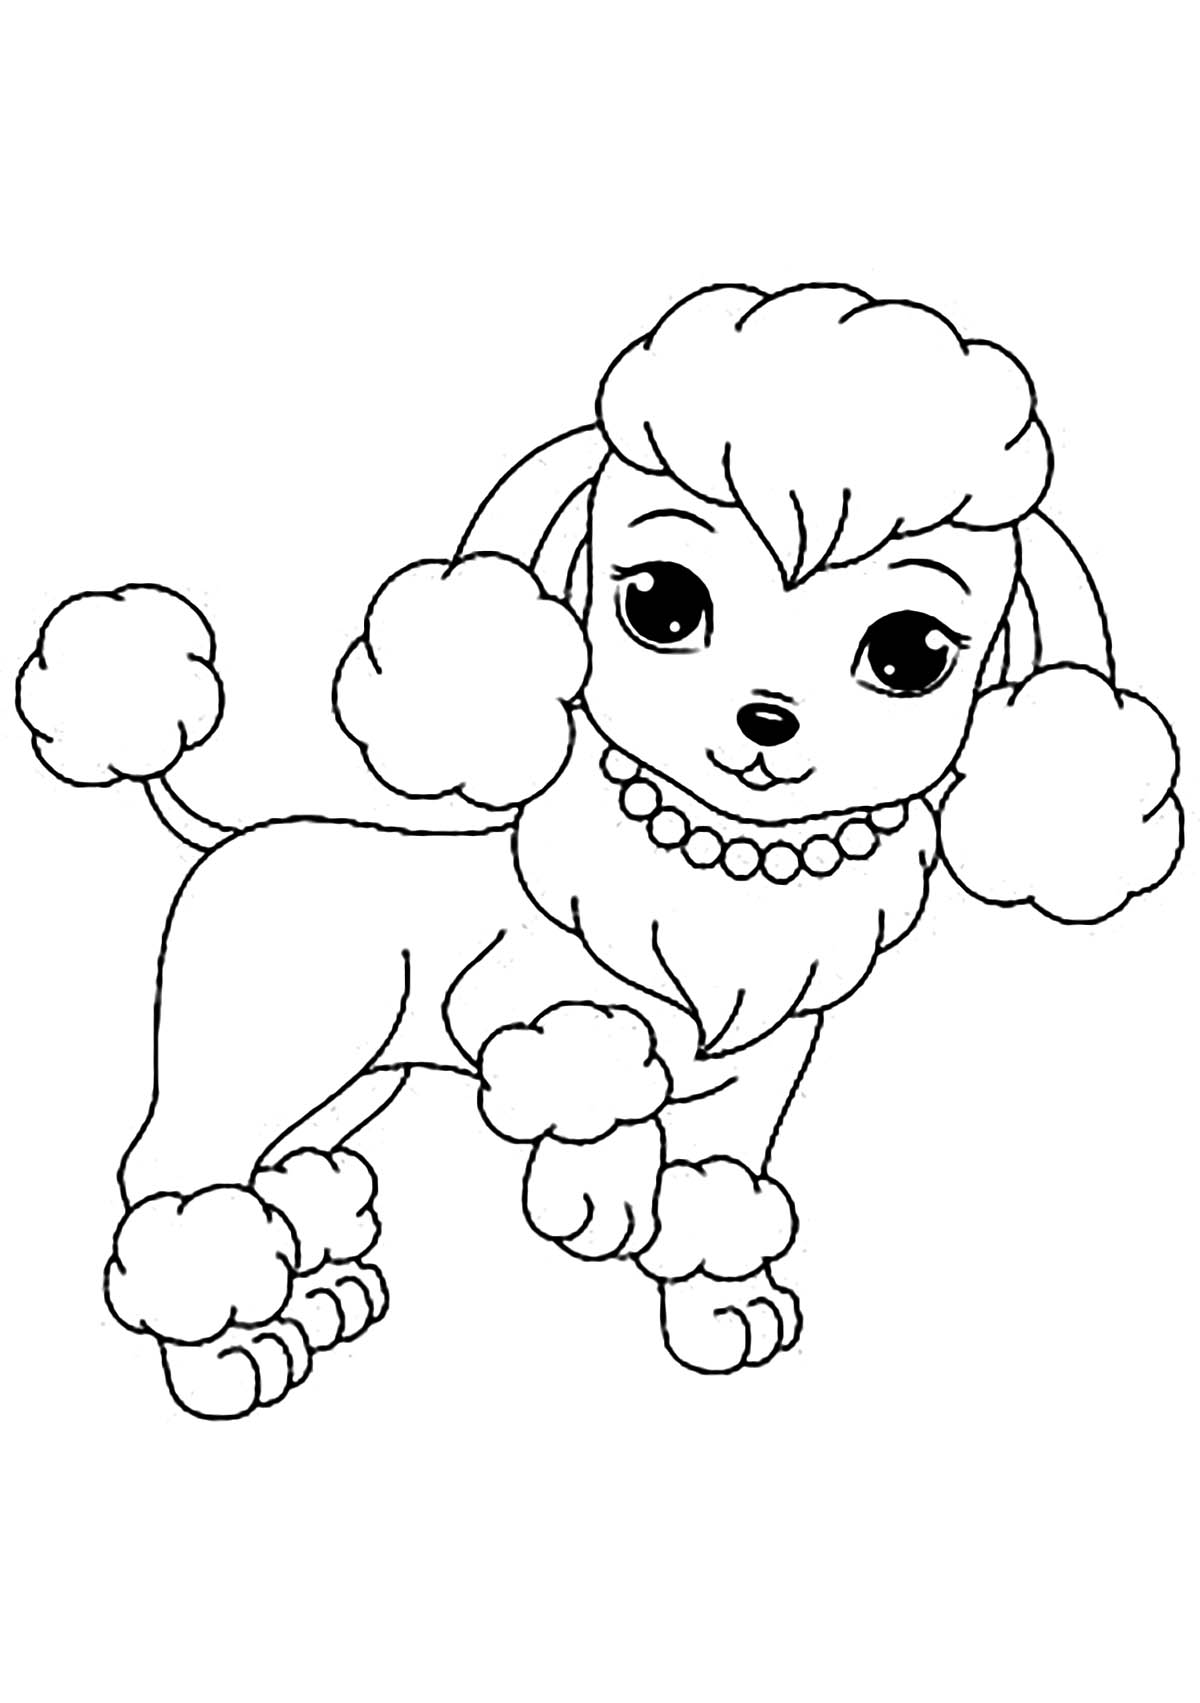 dog-free-to-color-for-children-cute-female-dog-dogs-kids-coloring-pages